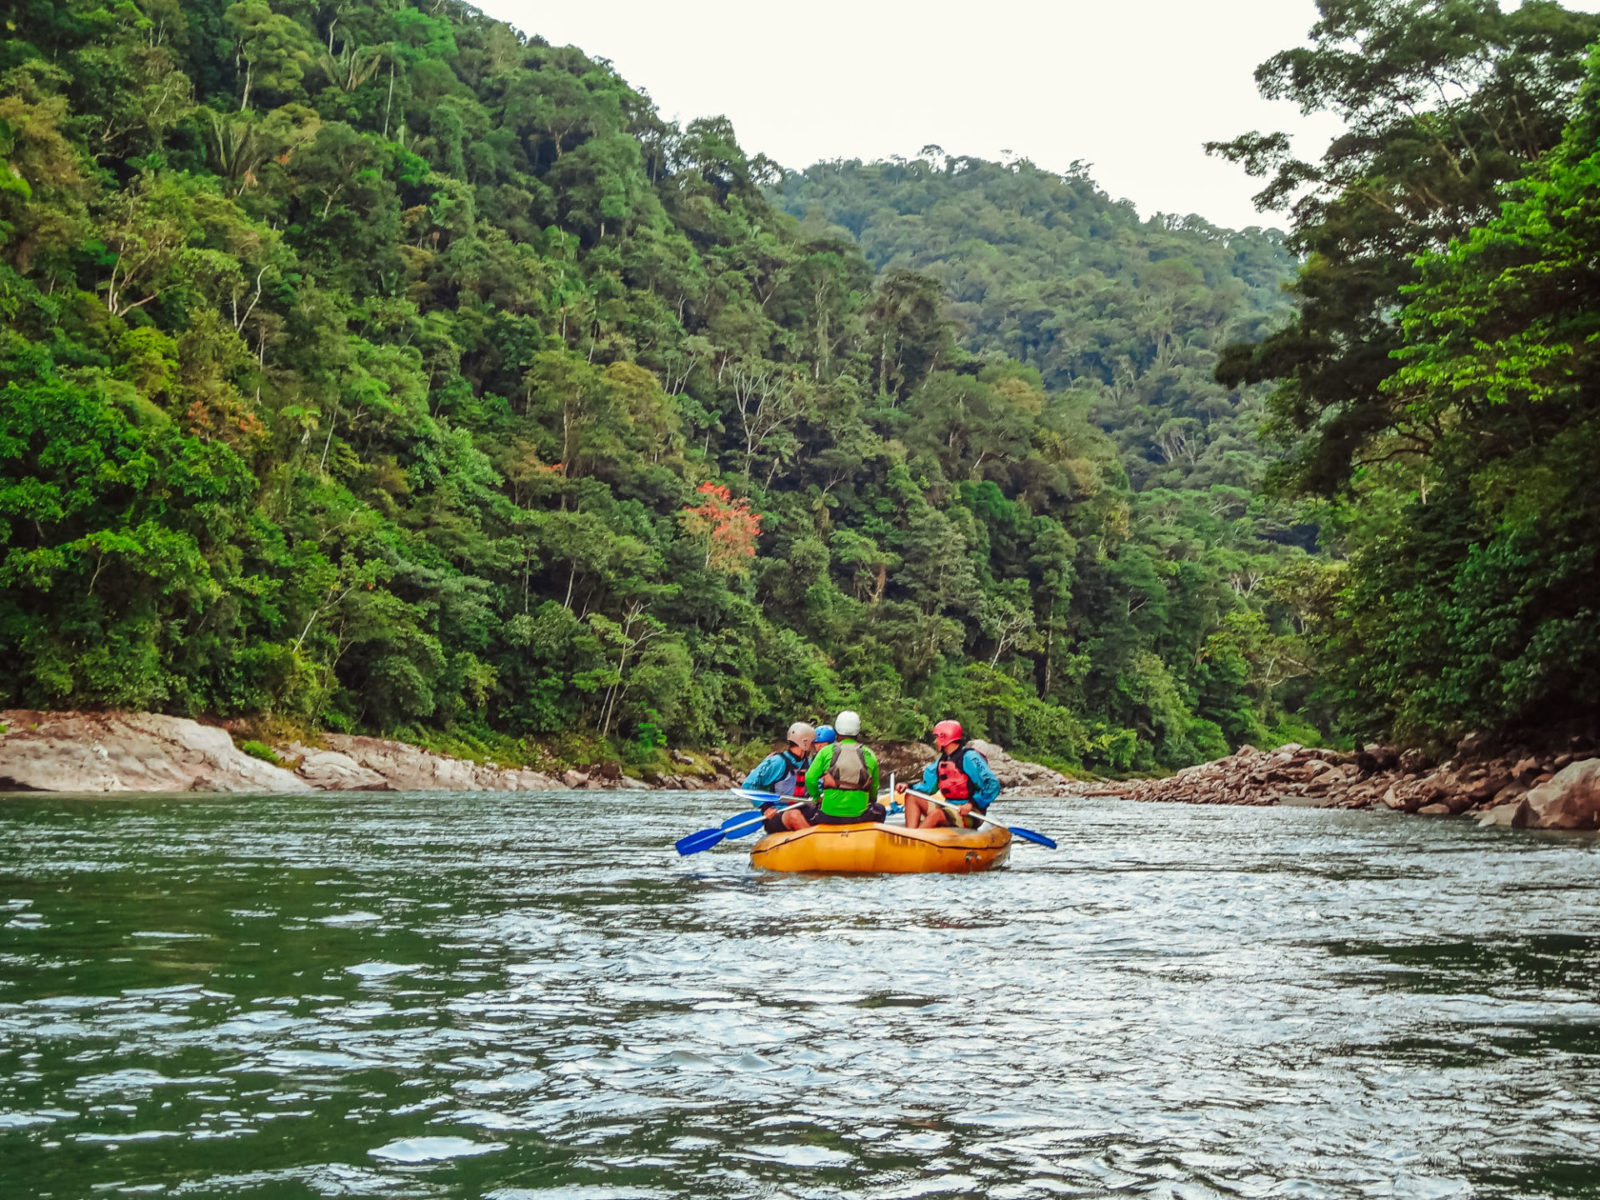 White water rafting in the Amazon